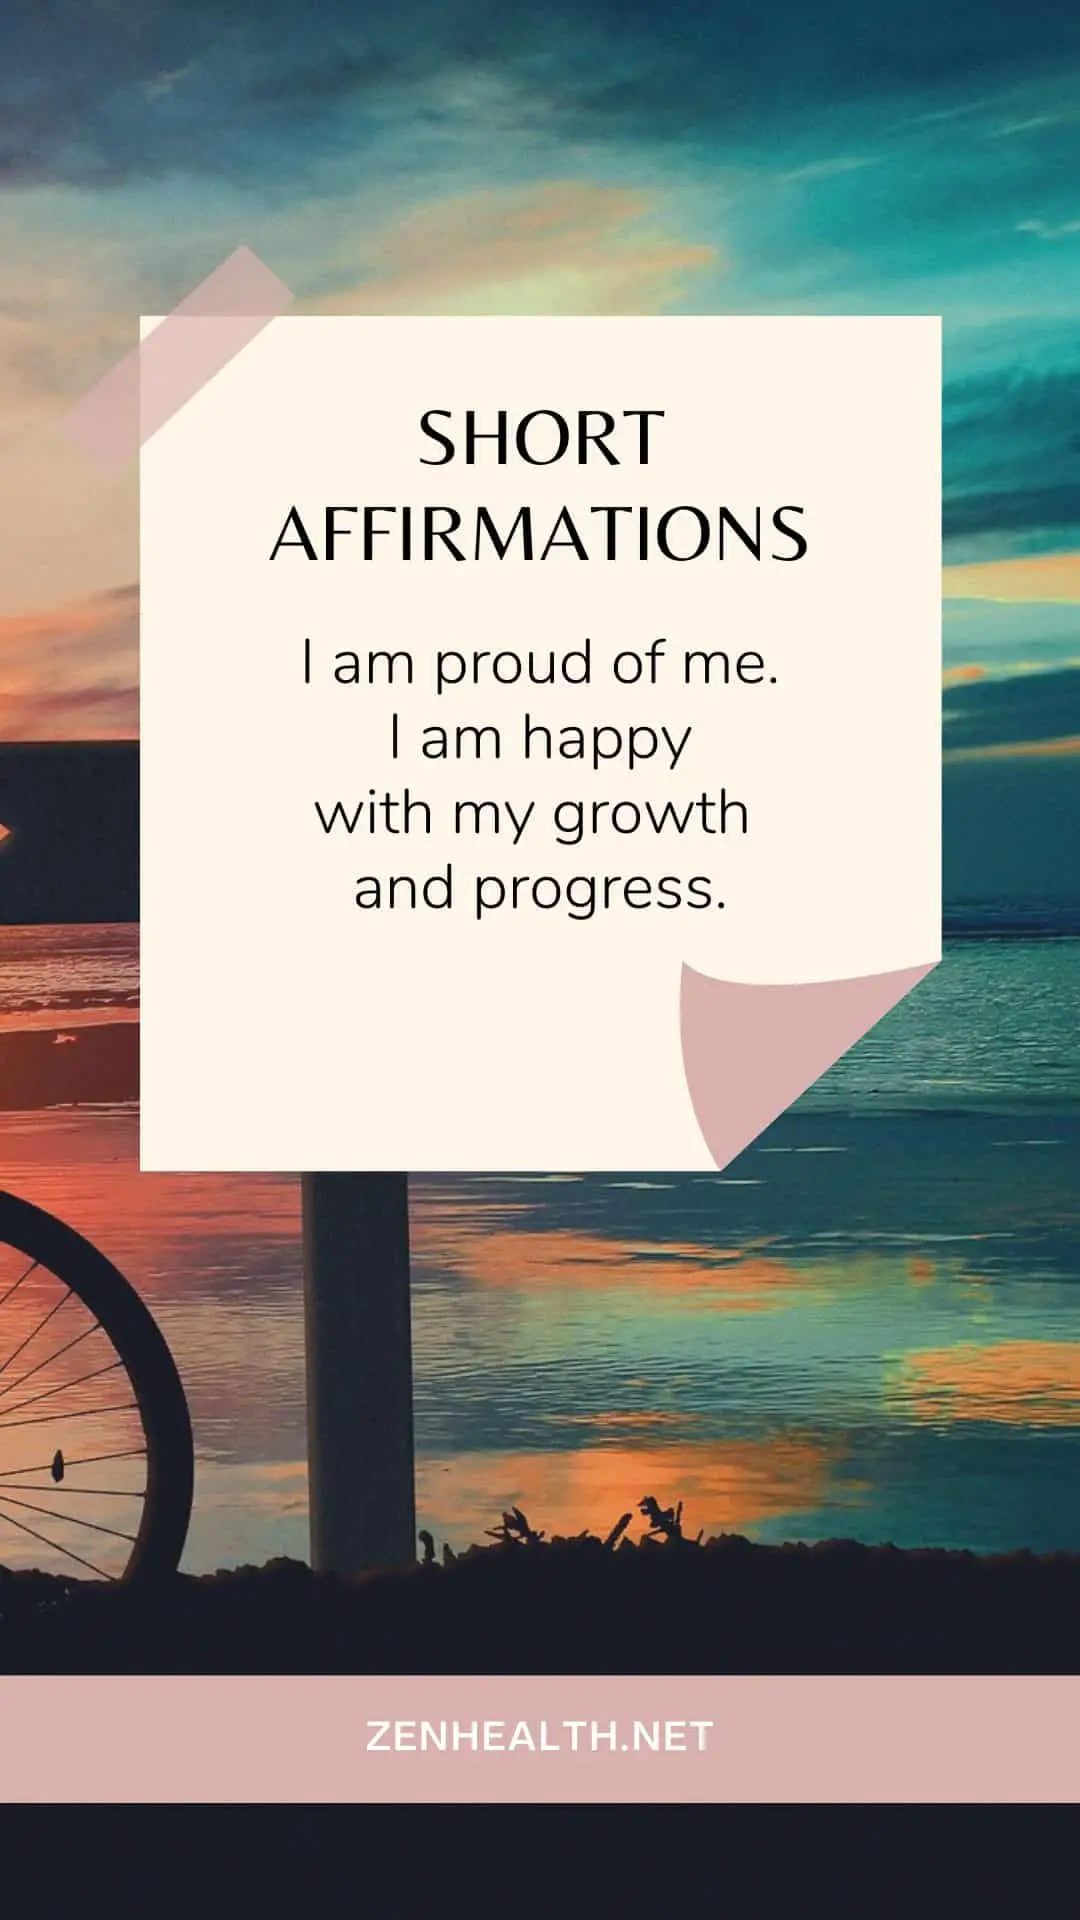 short affirmations: I am proud of me. I am happy with my growth and progress